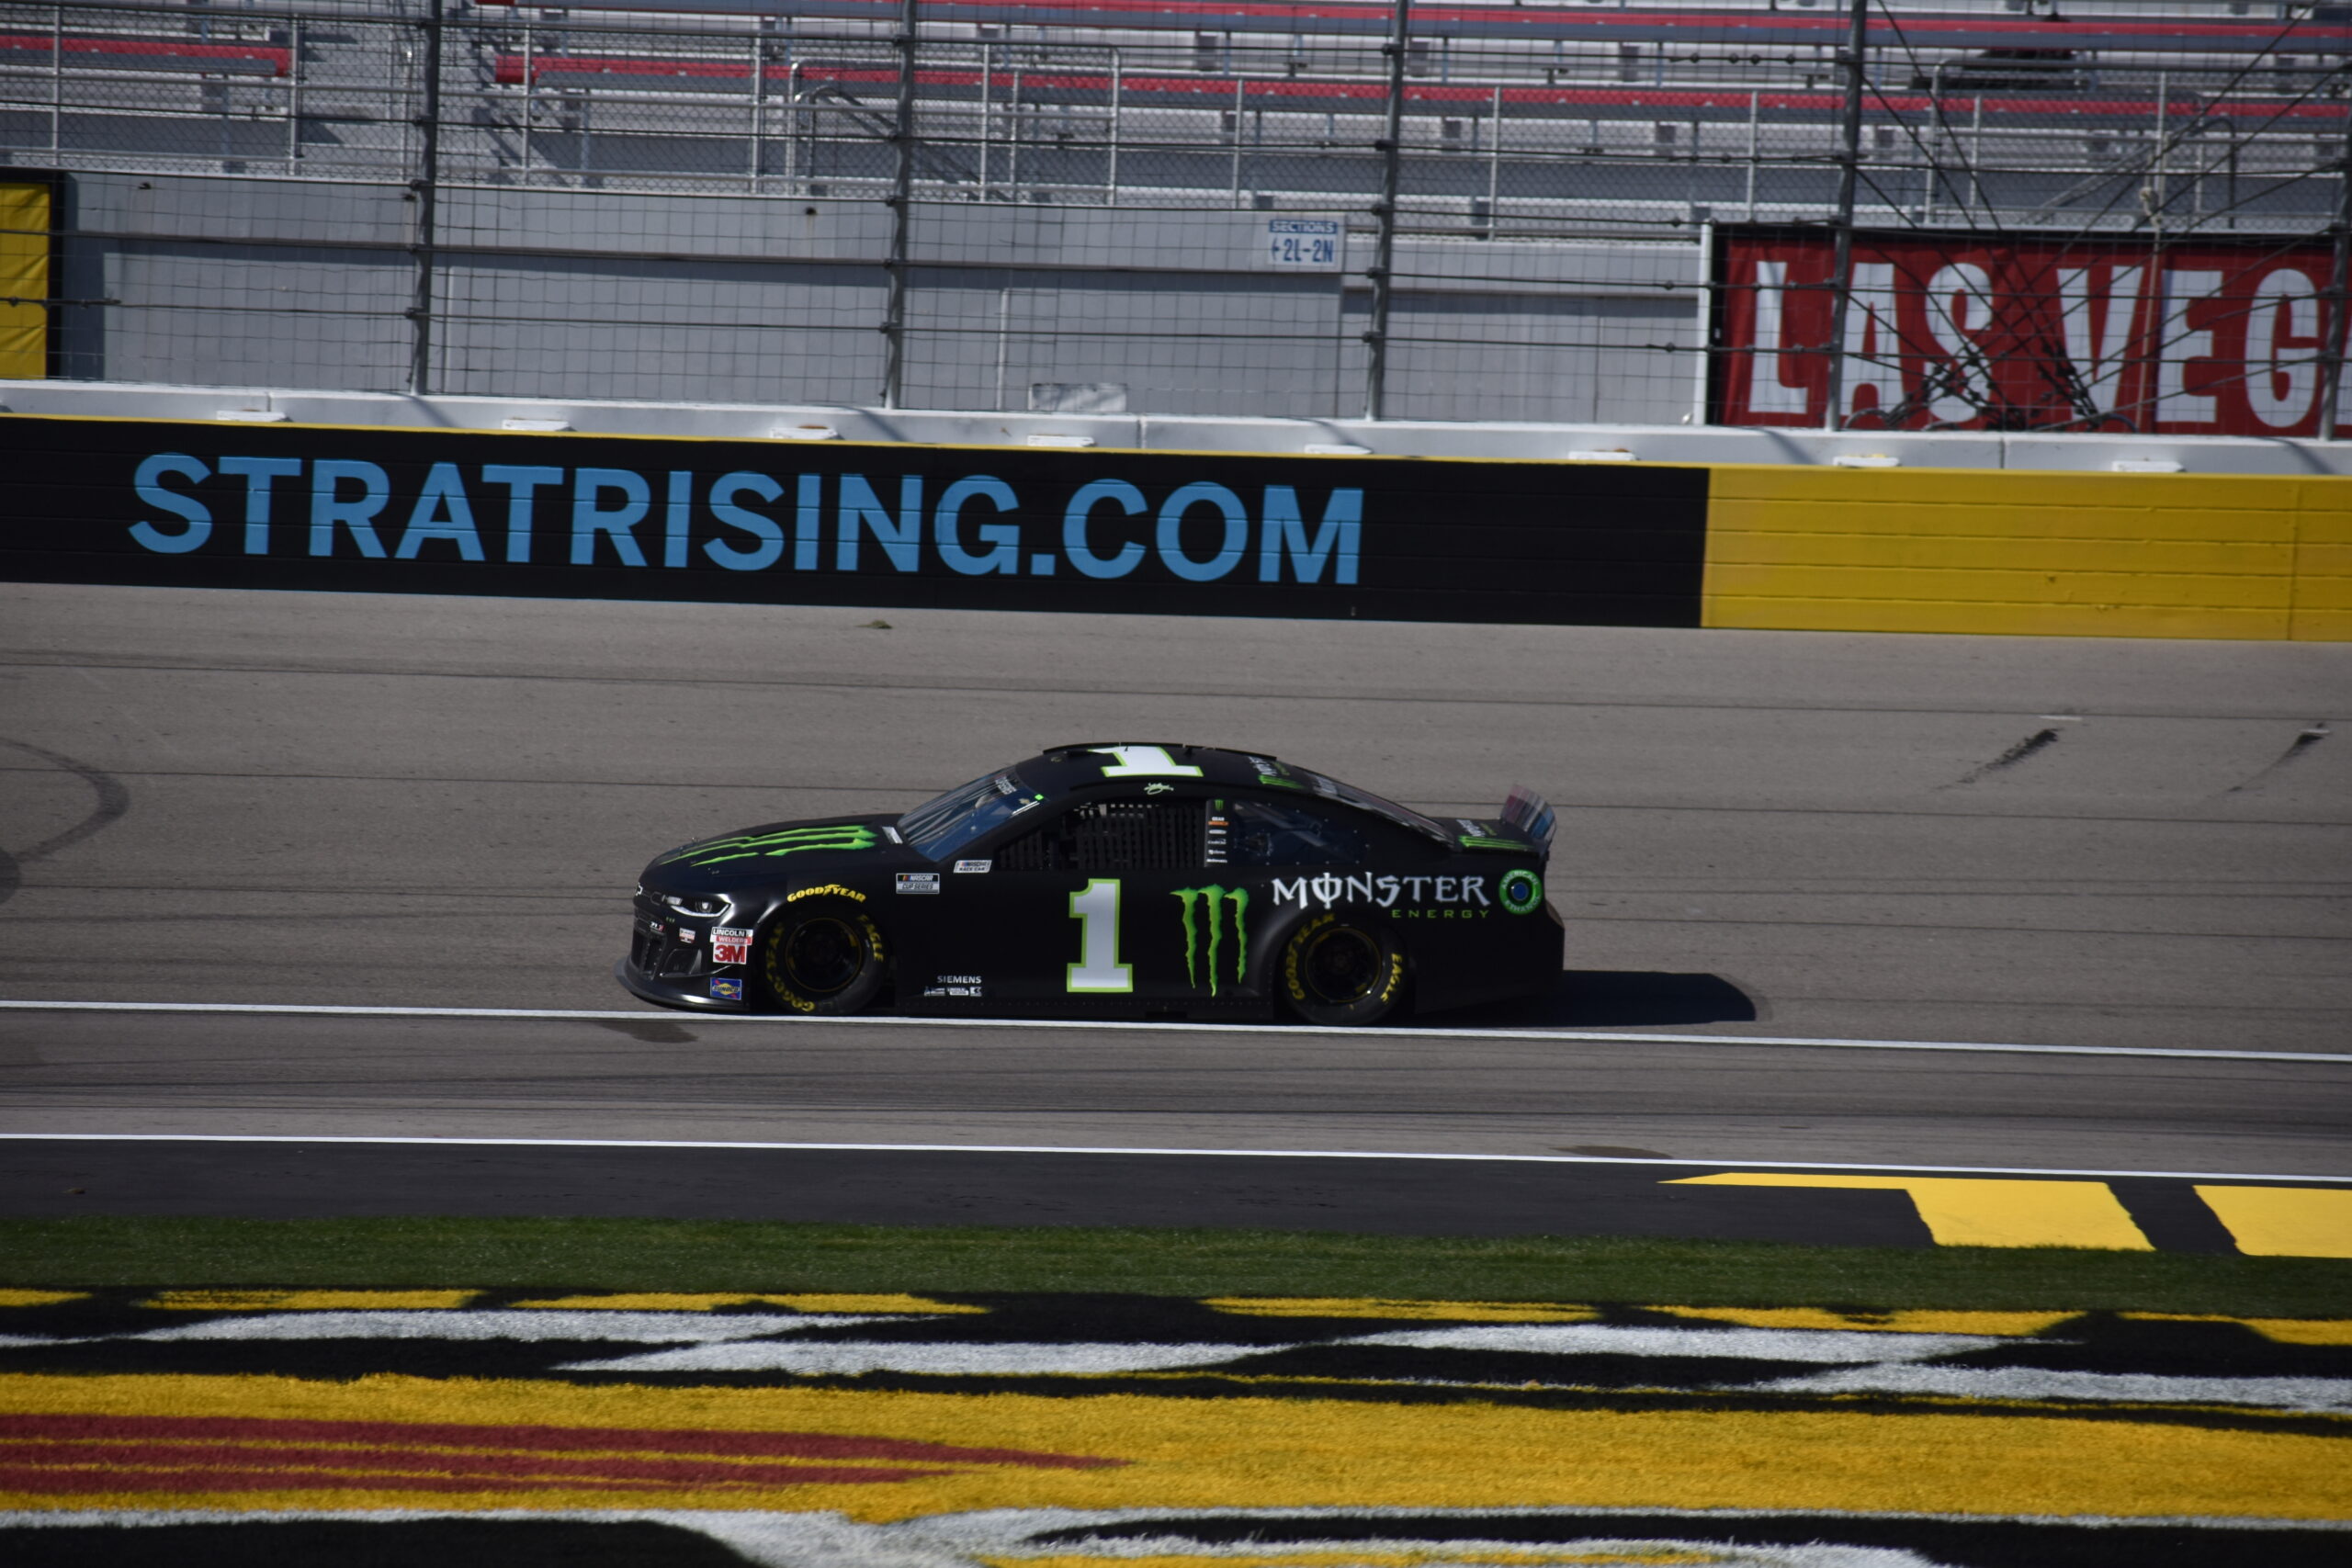 All things considered, Kurt Busch seems like a prime contender for Sunday's Pennzoil 400 at Las Vegas. (Photo Credit: Landen Ciardullo/TPF)